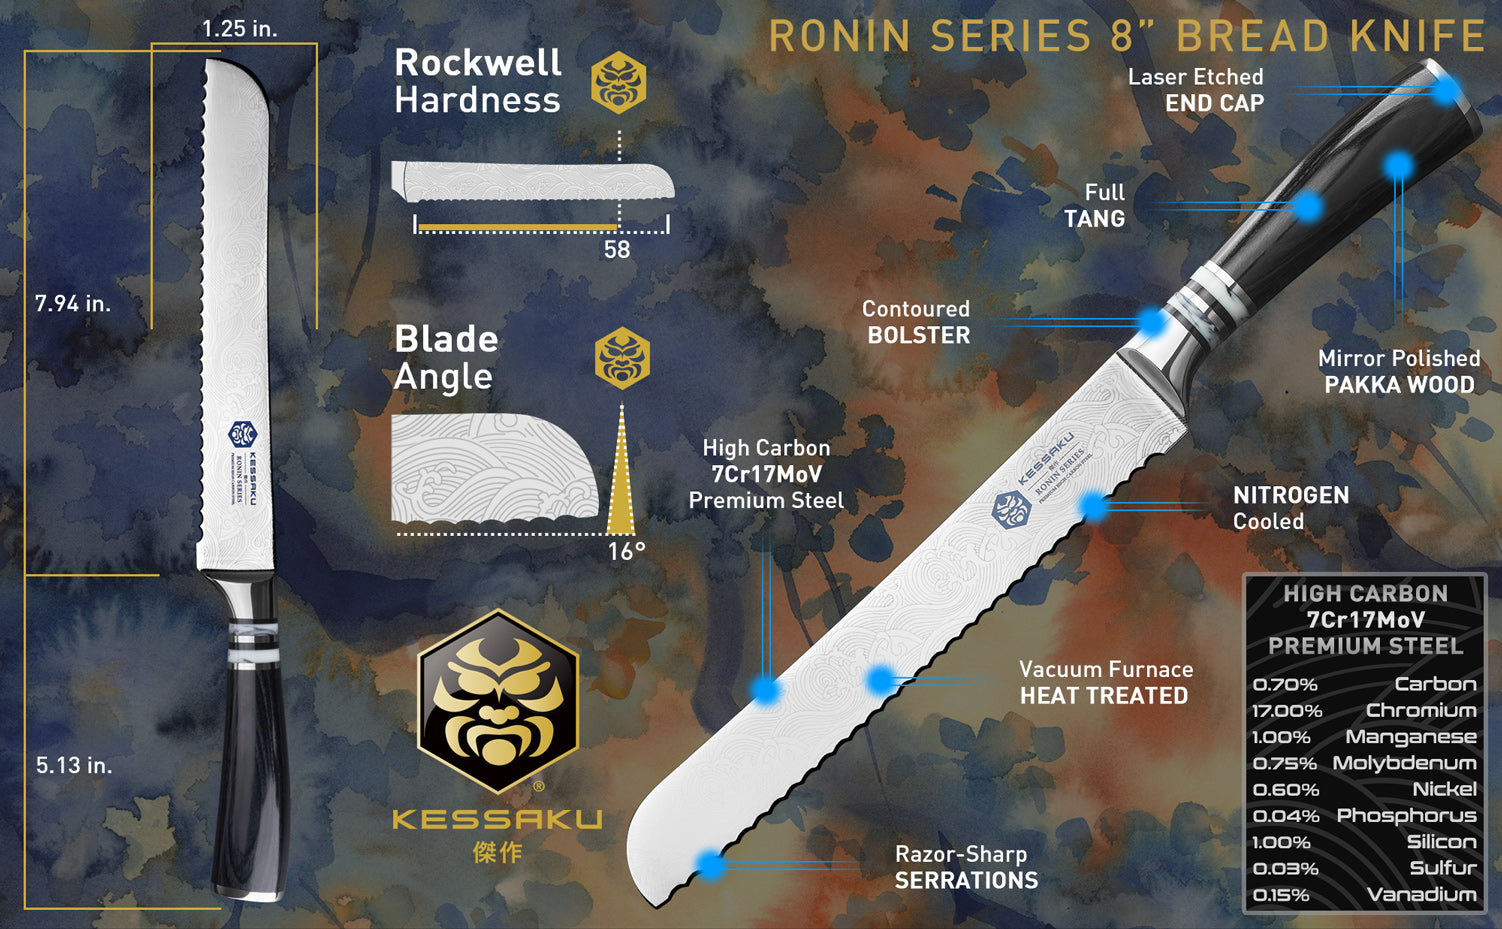 The Kessaku Ronin Series 8-Inch Bread Knife's features, dimensions, and steel composition